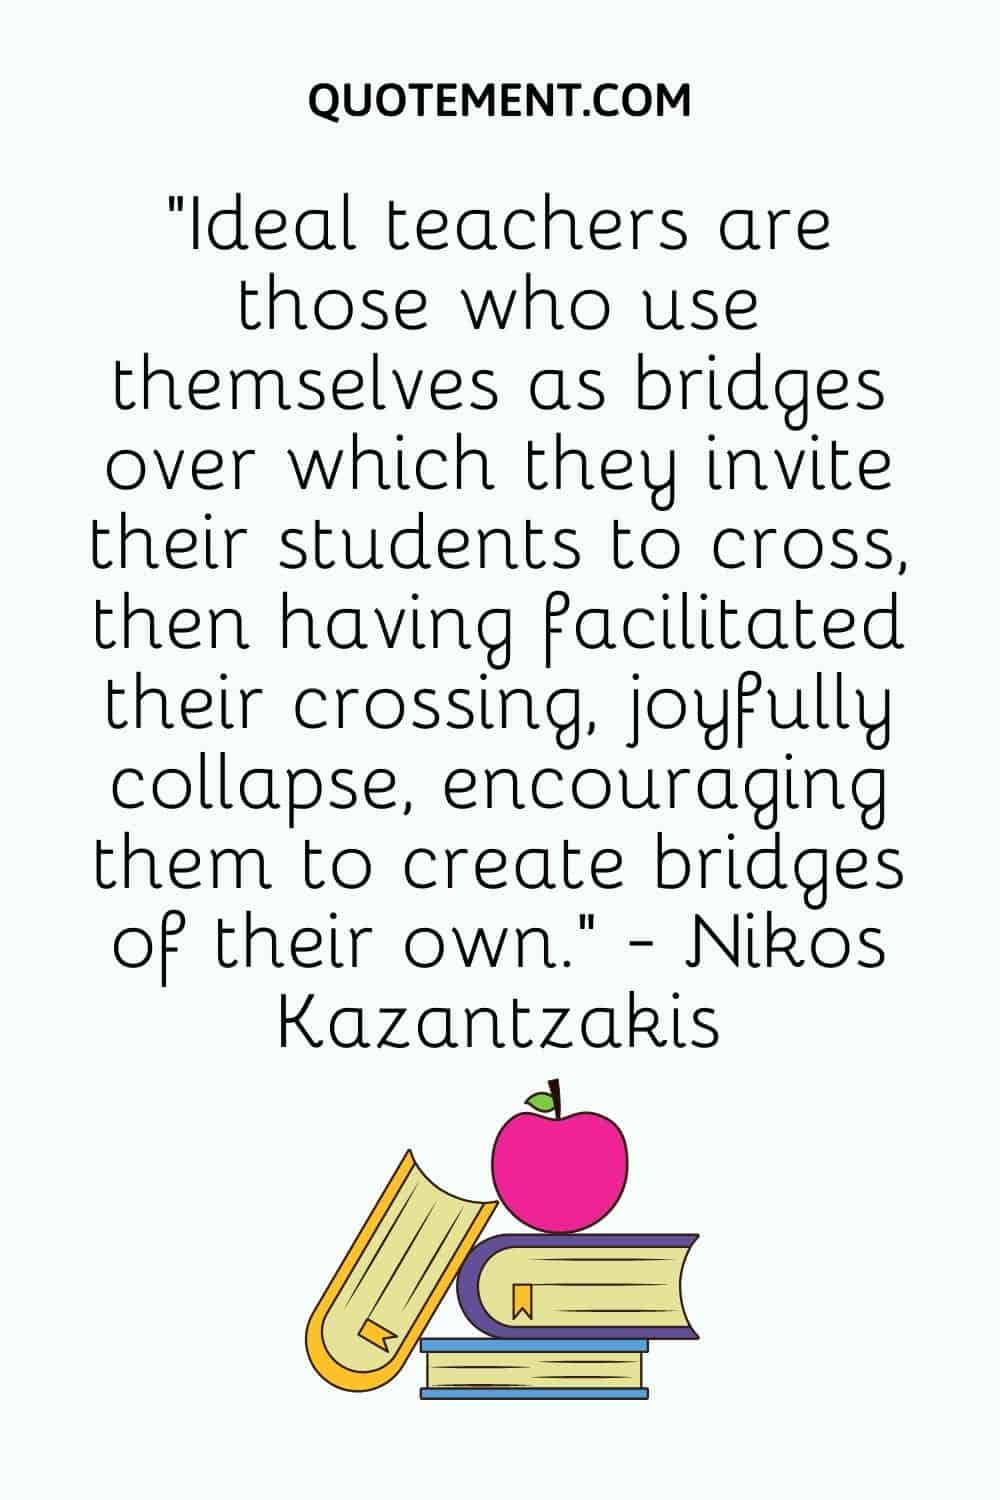 Ideal teachers are those who use themselves as bridges over